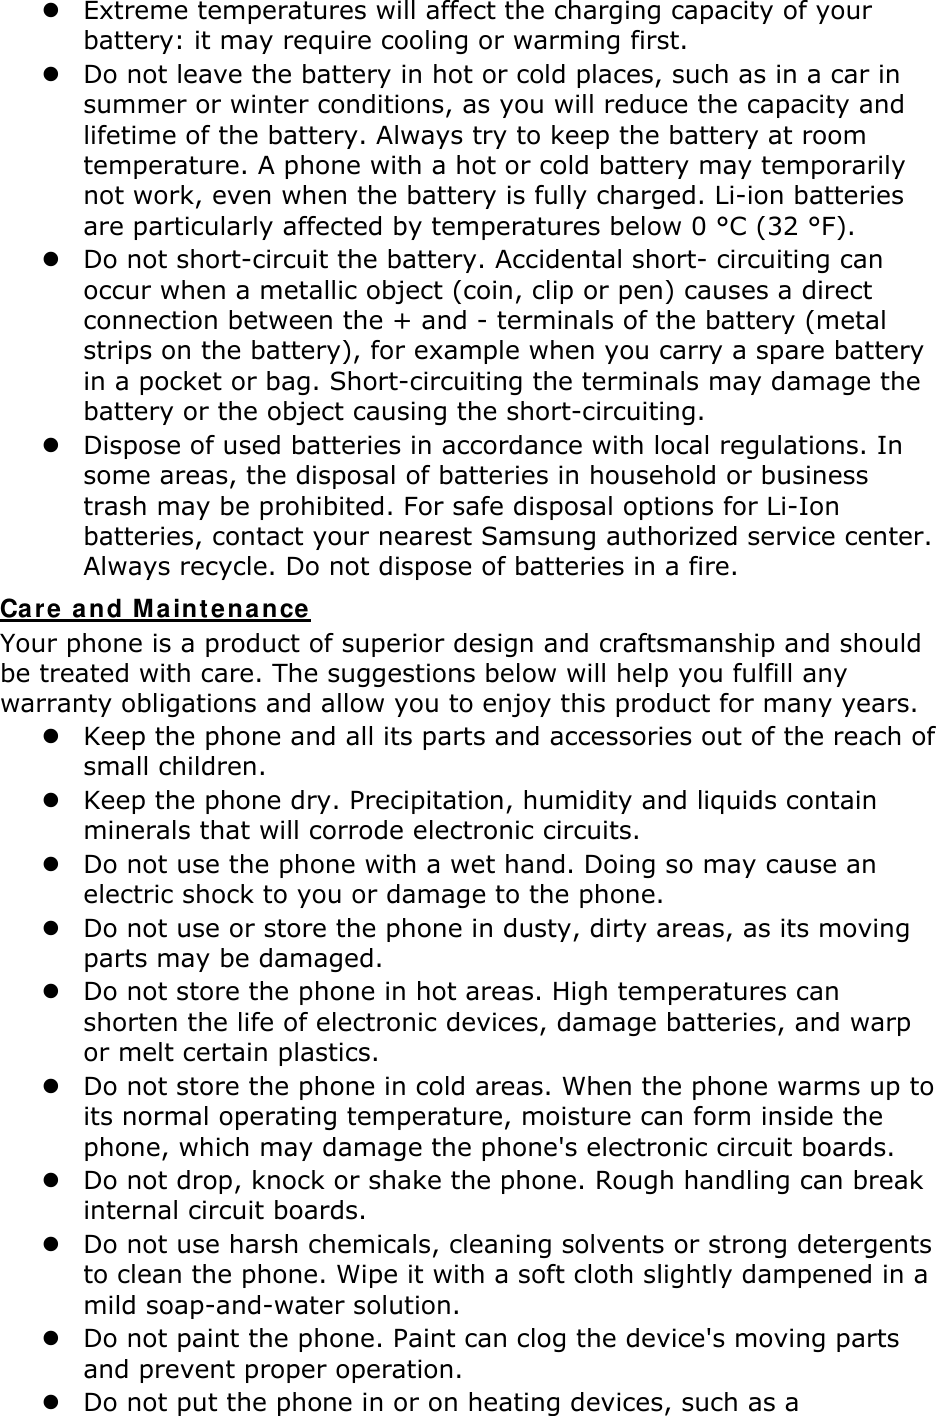  Extreme temperatures will affect the charging capacity of your battery: it may require cooling or warming first.  Do not leave the battery in hot or cold places, such as in a car in summer or winter conditions, as you will reduce the capacity and lifetime of the battery. Always try to keep the battery at room temperature. A phone with a hot or cold battery may temporarily not work, even when the battery is fully charged. Li-ion batteries are particularly affected by temperatures below 0 °C (32 °F).  Do not short-circuit the battery. Accidental short- circuiting can occur when a metallic object (coin, clip or pen) causes a direct connection between the + and - terminals of the battery (metal strips on the battery), for example when you carry a spare battery in a pocket or bag. Short-circuiting the terminals may damage the battery or the object causing the short-circuiting.  Dispose of used batteries in accordance with local regulations. In some areas, the disposal of batteries in household or business trash may be prohibited. For safe disposal options for Li-Ion batteries, contact your nearest Samsung authorized service center. Always recycle. Do not dispose of batteries in a fire. Care and Maintenance Your phone is a product of superior design and craftsmanship and should be treated with care. The suggestions below will help you fulfill any warranty obligations and allow you to enjoy this product for many years.  Keep the phone and all its parts and accessories out of the reach of small children.  Keep the phone dry. Precipitation, humidity and liquids contain minerals that will corrode electronic circuits.  Do not use the phone with a wet hand. Doing so may cause an electric shock to you or damage to the phone.  Do not use or store the phone in dusty, dirty areas, as its moving parts may be damaged.  Do not store the phone in hot areas. High temperatures can shorten the life of electronic devices, damage batteries, and warp or melt certain plastics.  Do not store the phone in cold areas. When the phone warms up to its normal operating temperature, moisture can form inside the phone, which may damage the phone&apos;s electronic circuit boards.  Do not drop, knock or shake the phone. Rough handling can break internal circuit boards.  Do not use harsh chemicals, cleaning solvents or strong detergents to clean the phone. Wipe it with a soft cloth slightly dampened in a mild soap-and-water solution.  Do not paint the phone. Paint can clog the device&apos;s moving parts and prevent proper operation.  Do not put the phone in or on heating devices, such as a 